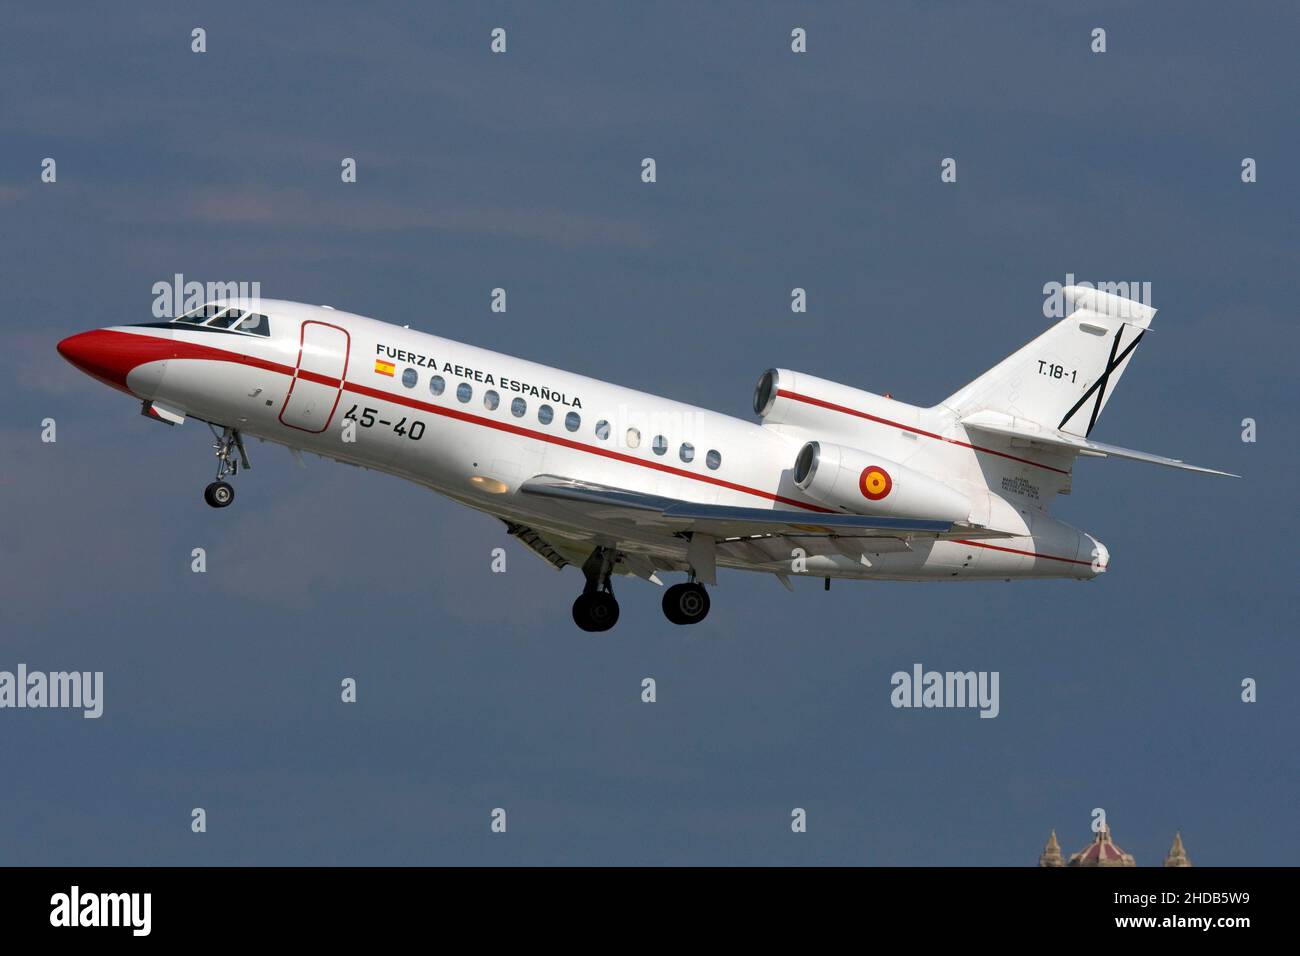 Spanish Air Force Dassault Falcon 900B (Reg.: T18-1) after lifting off from runway 31. Stock Photo